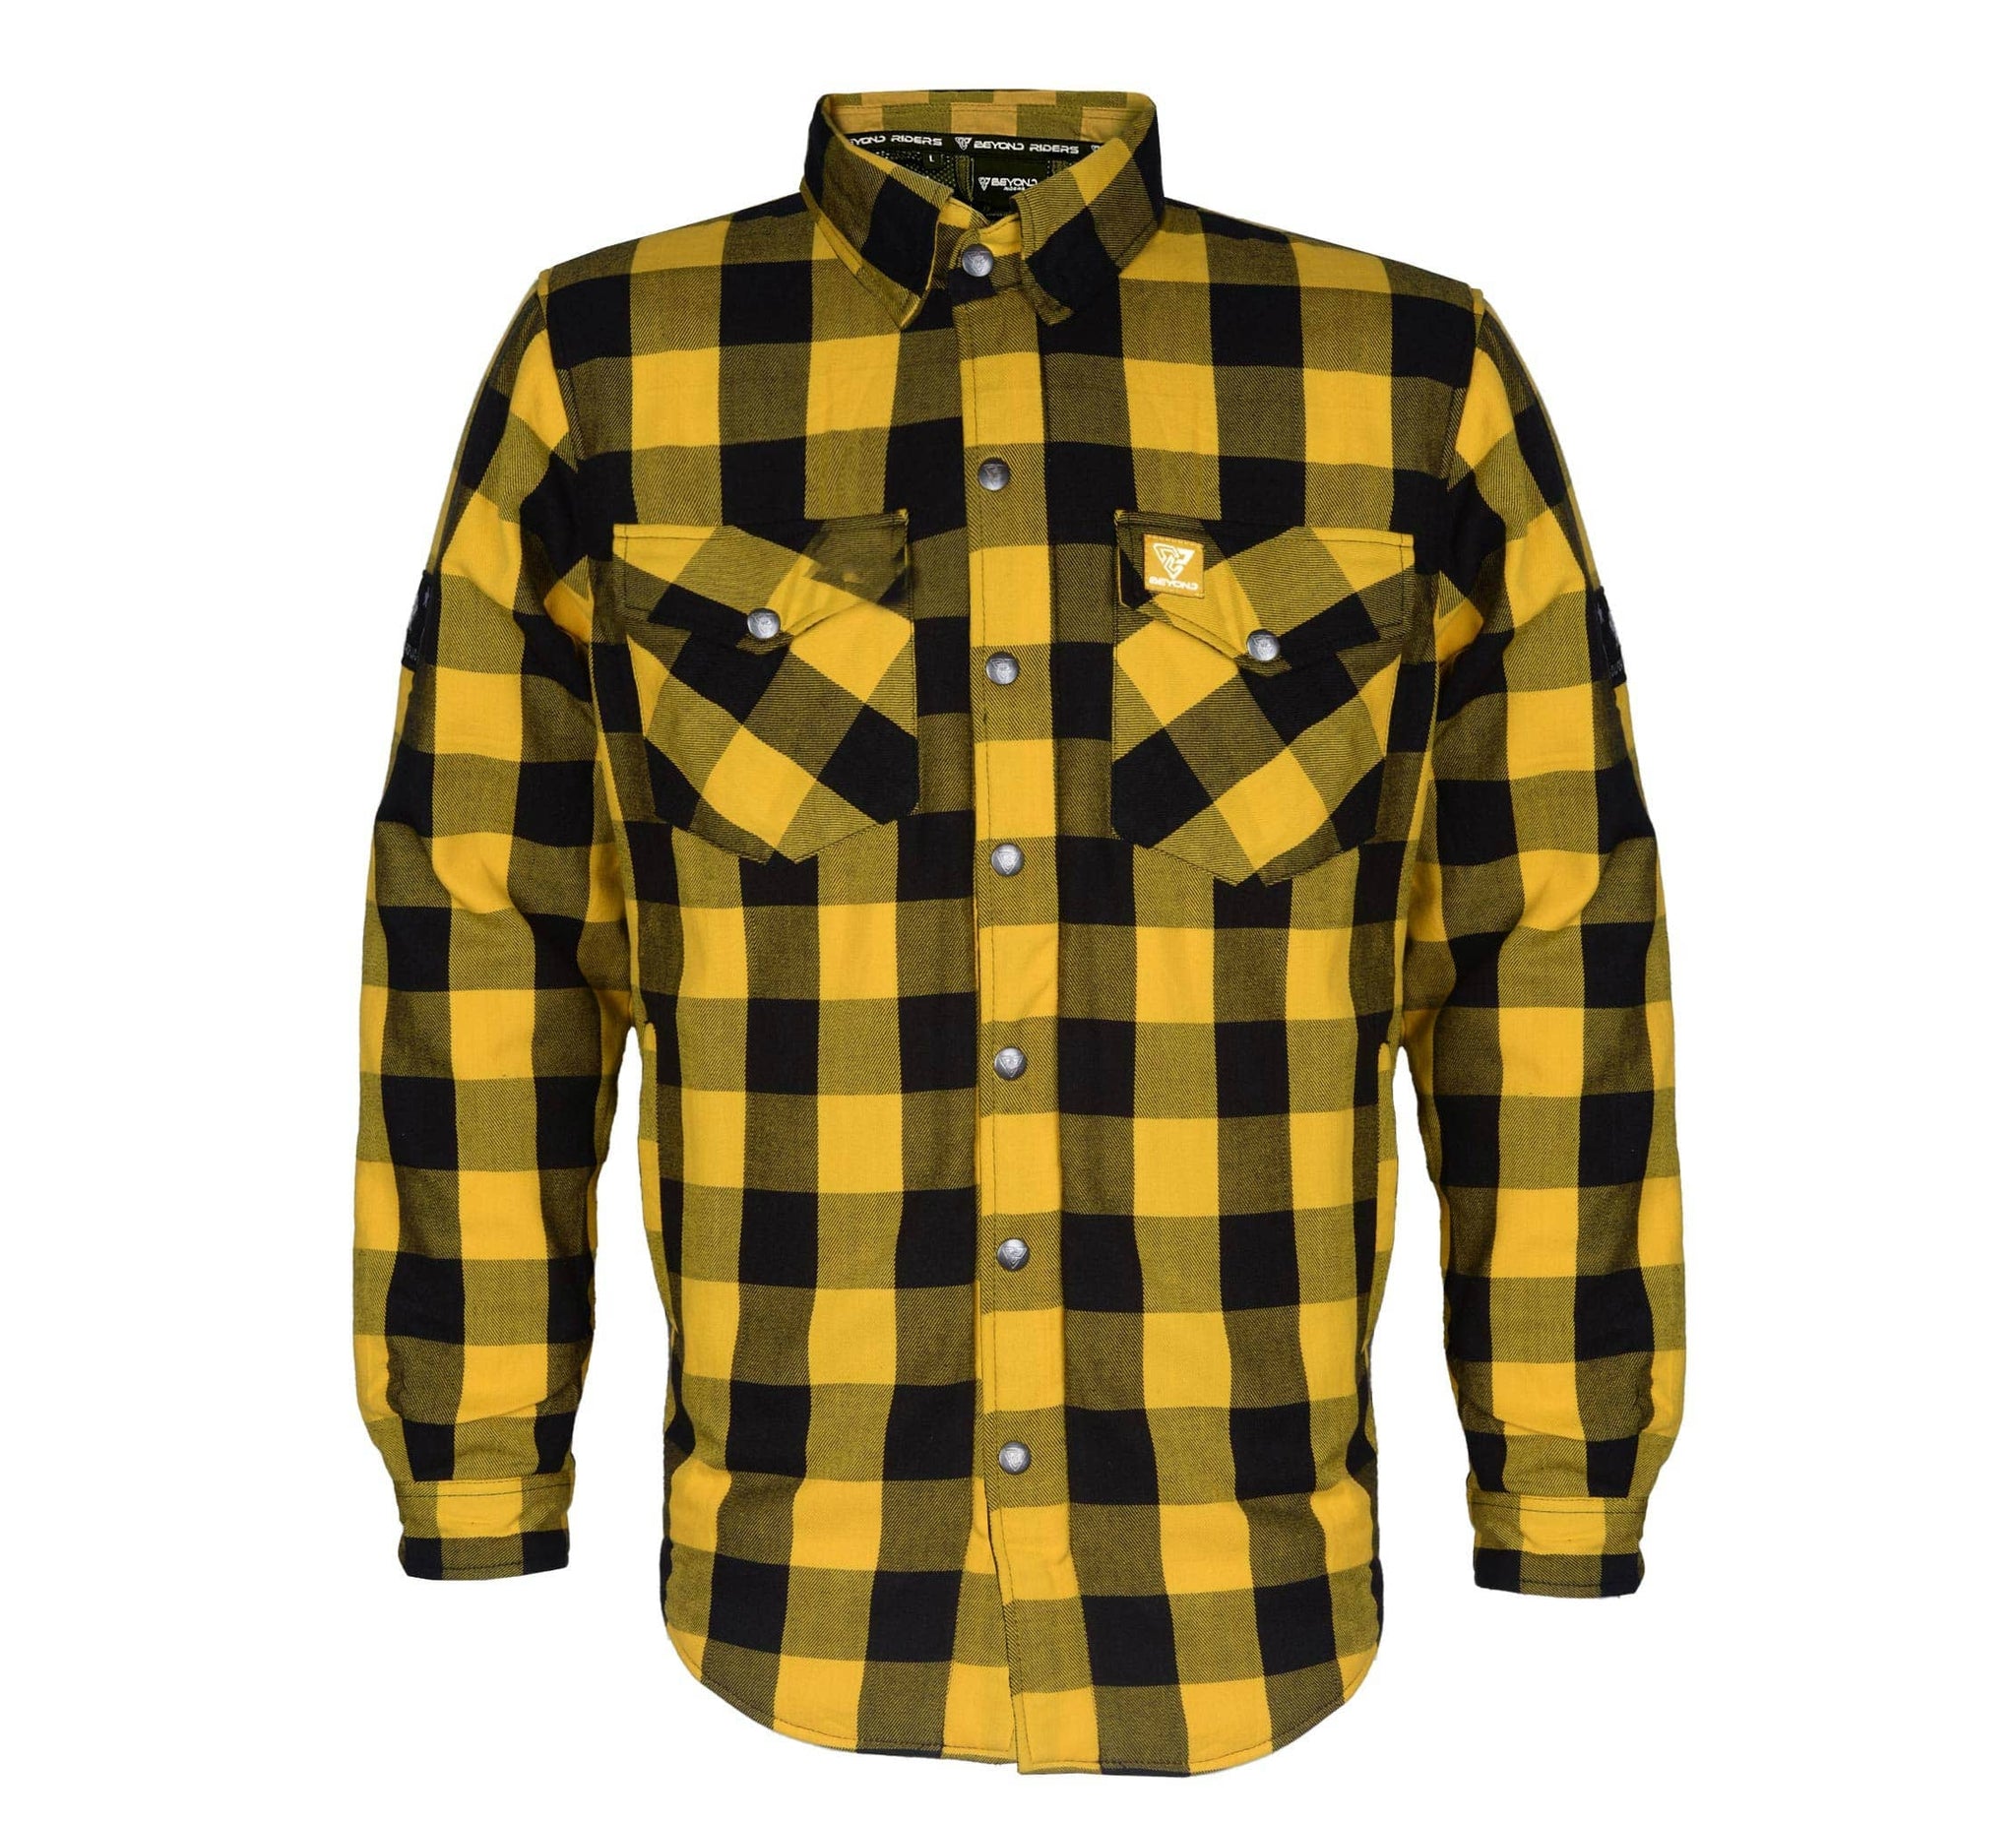 Protective Flannel Shirt "Blaze of Glory" - Yellow and Black Checkered with Pads